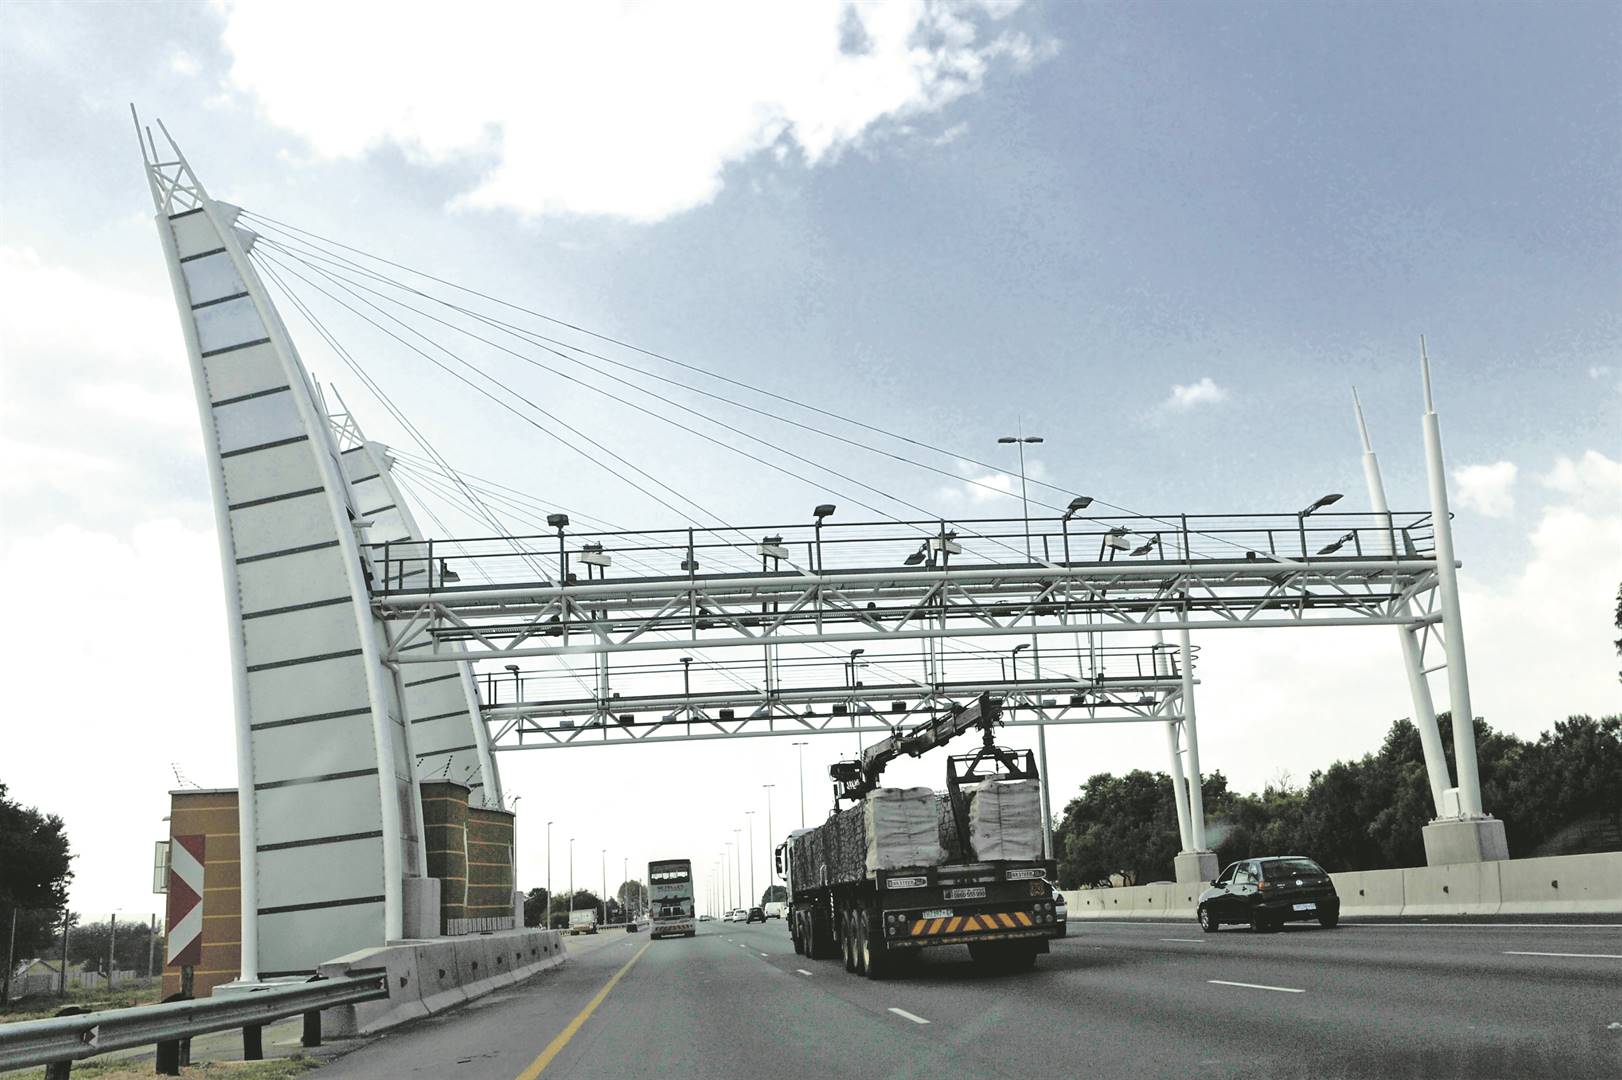 Last week Thursday, the SA National Roads Agency Limited published a gazette declaring that e-tolls will officially cease to exist as of 11 April 2024.